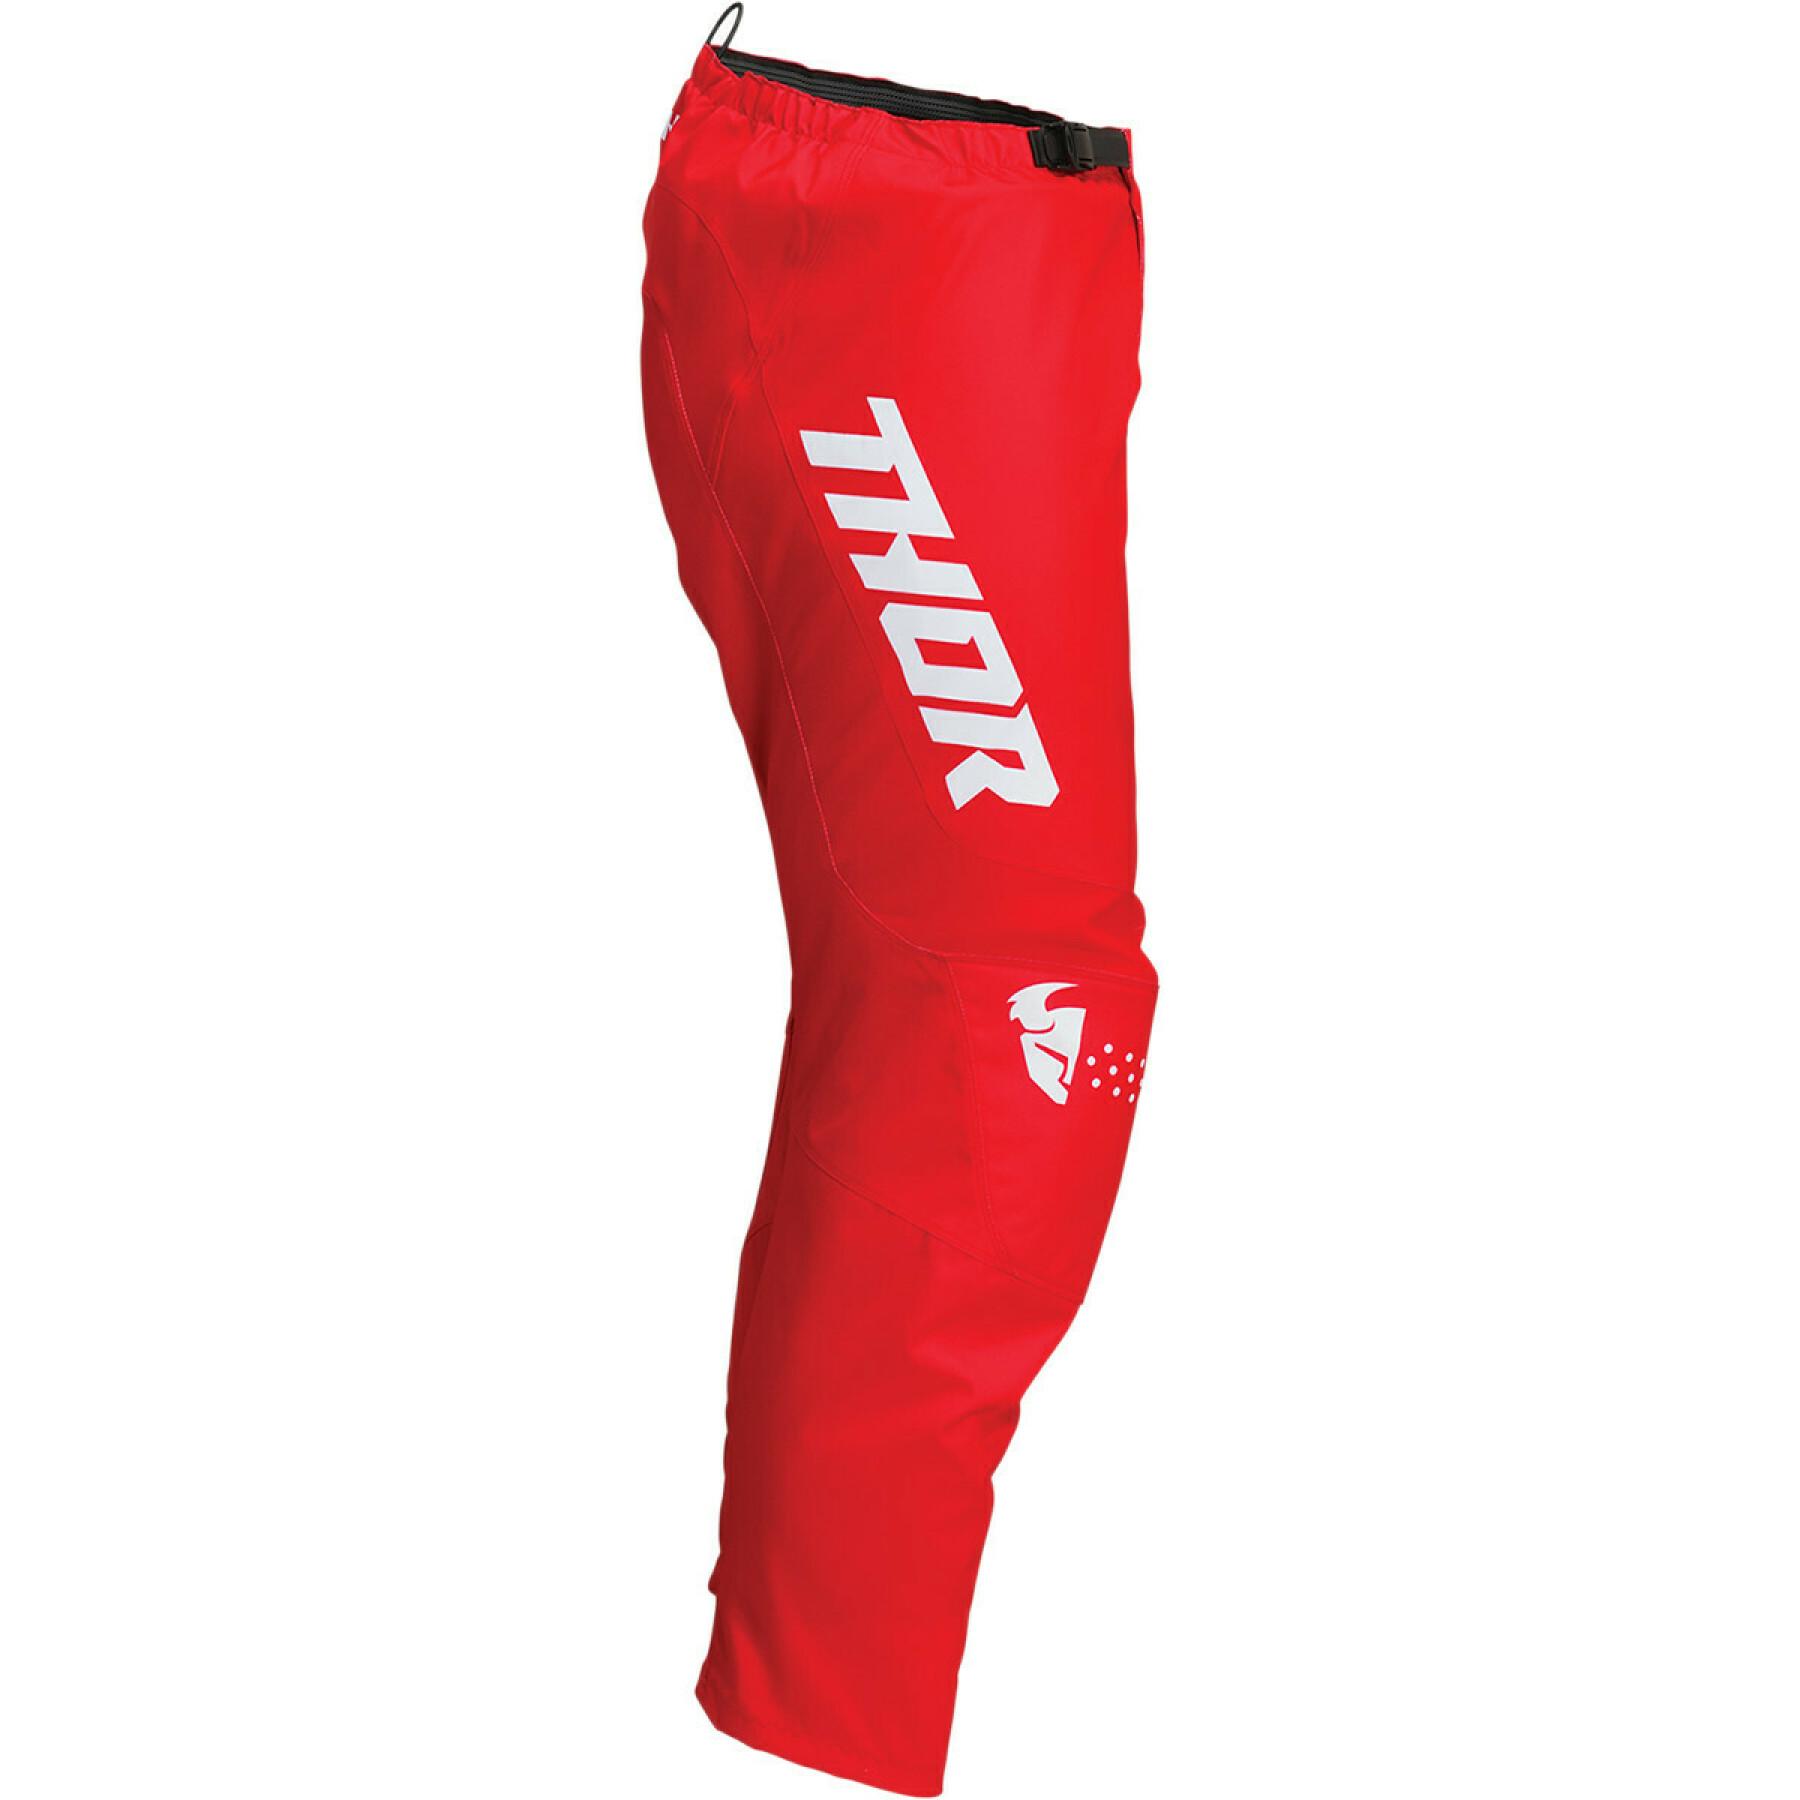 Child cross country pants Thor sector minim